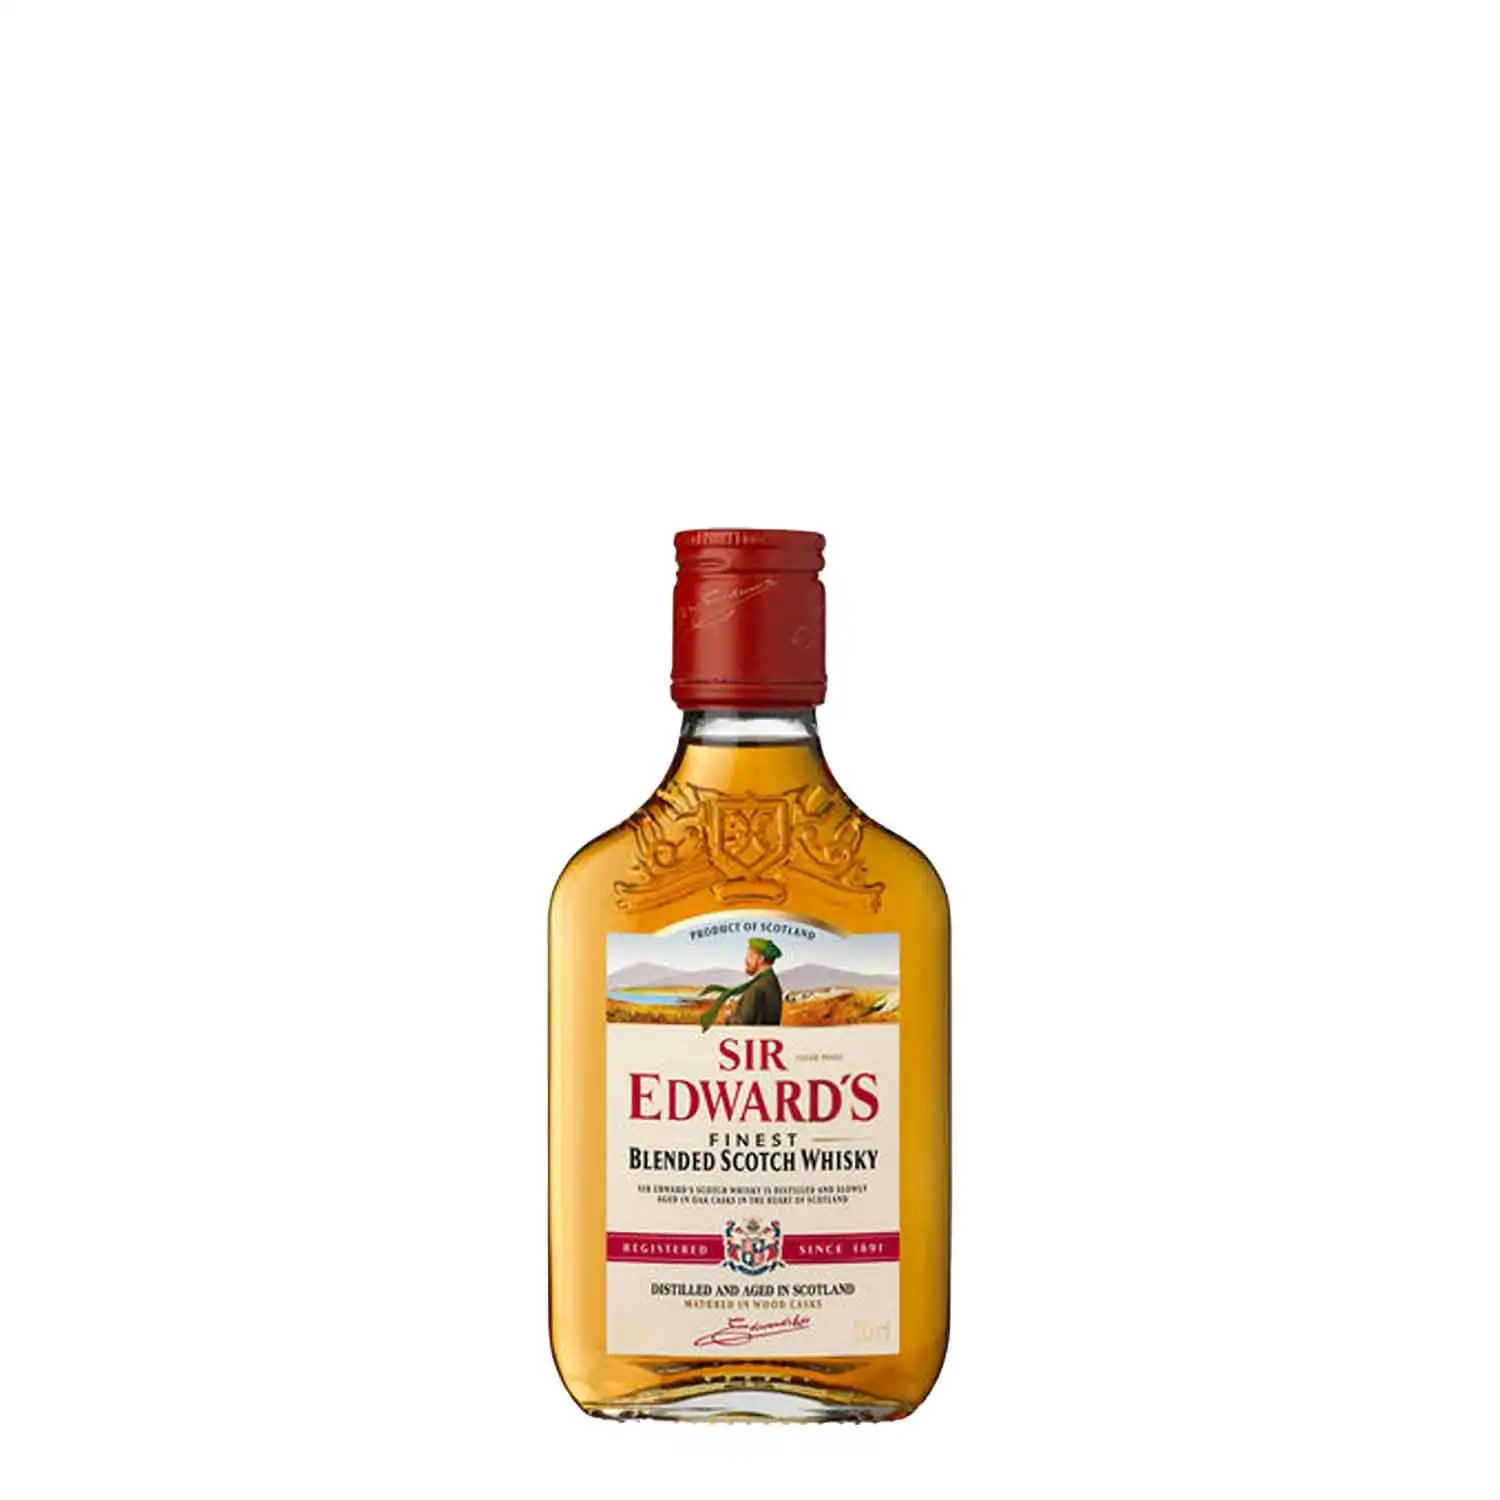 Sir Edward's finest 20cl Alc 40% - Buy at Real Tobacco